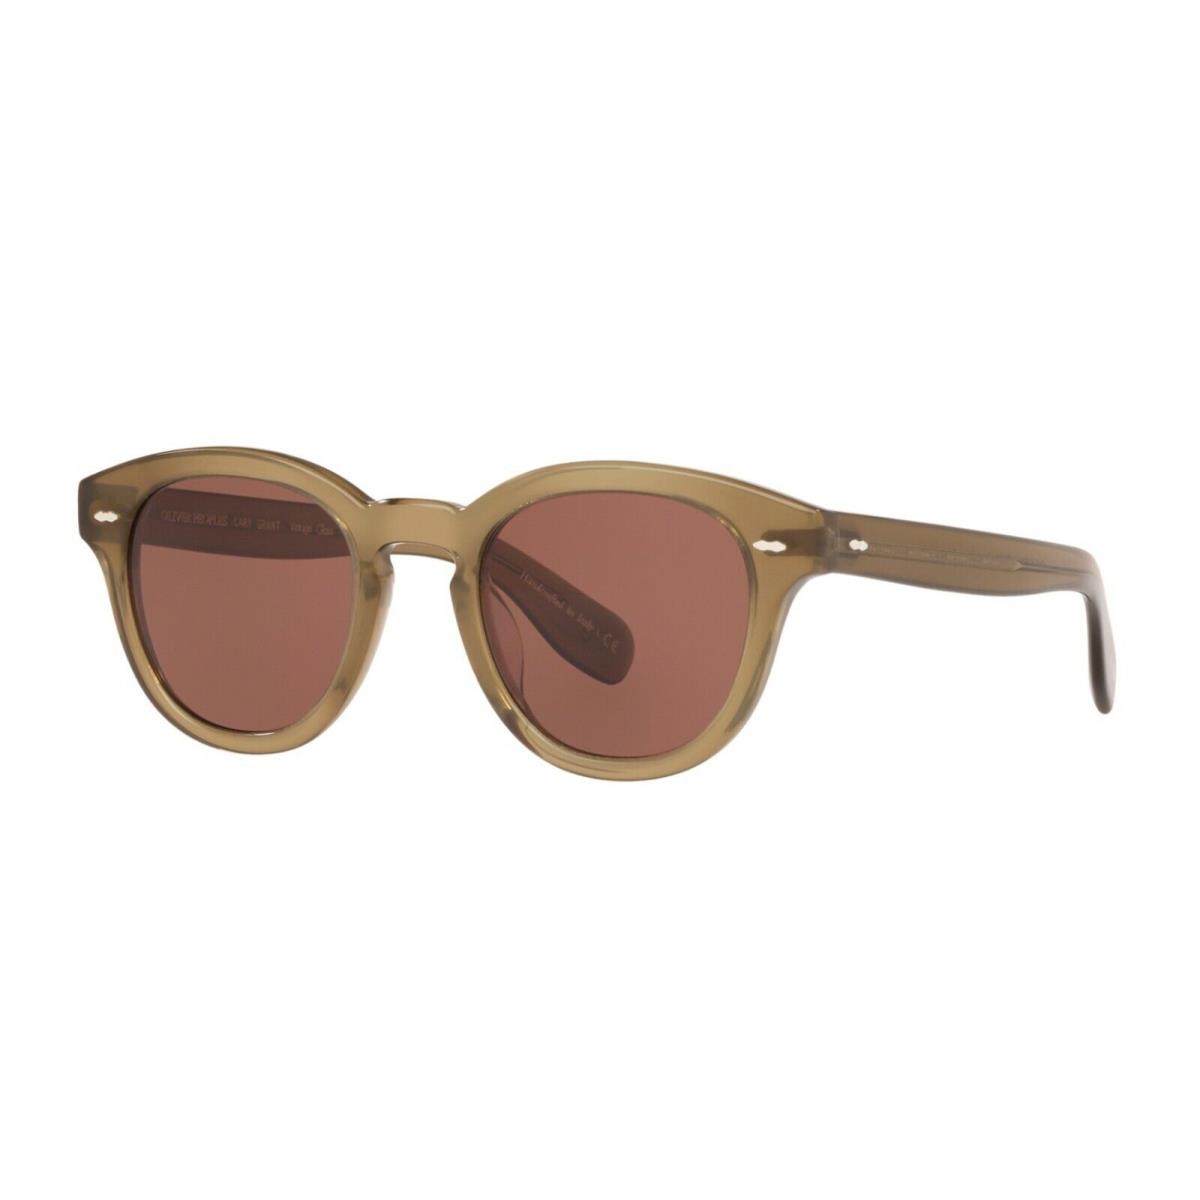 Oliver Peoples Cary Grant Sun OV 5413SU Dusty Olive/rosewood 1678C5 Sunglasses - Frame: Dusty Olive, Lens: